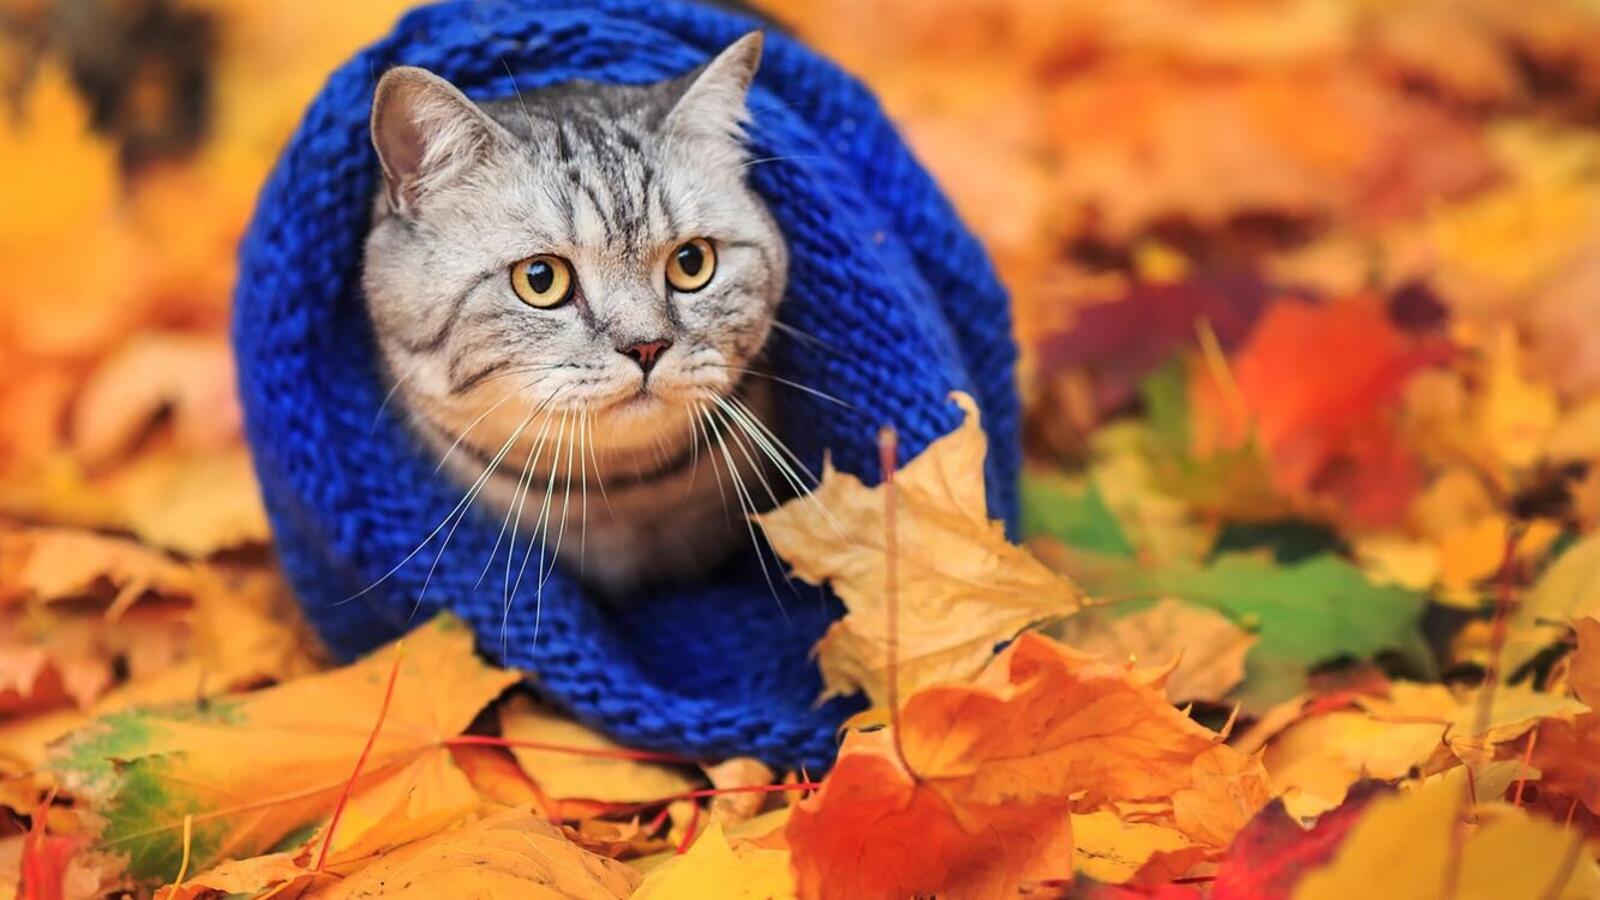 Wallpapers wallpaper funny cat leaves cute on the desktop